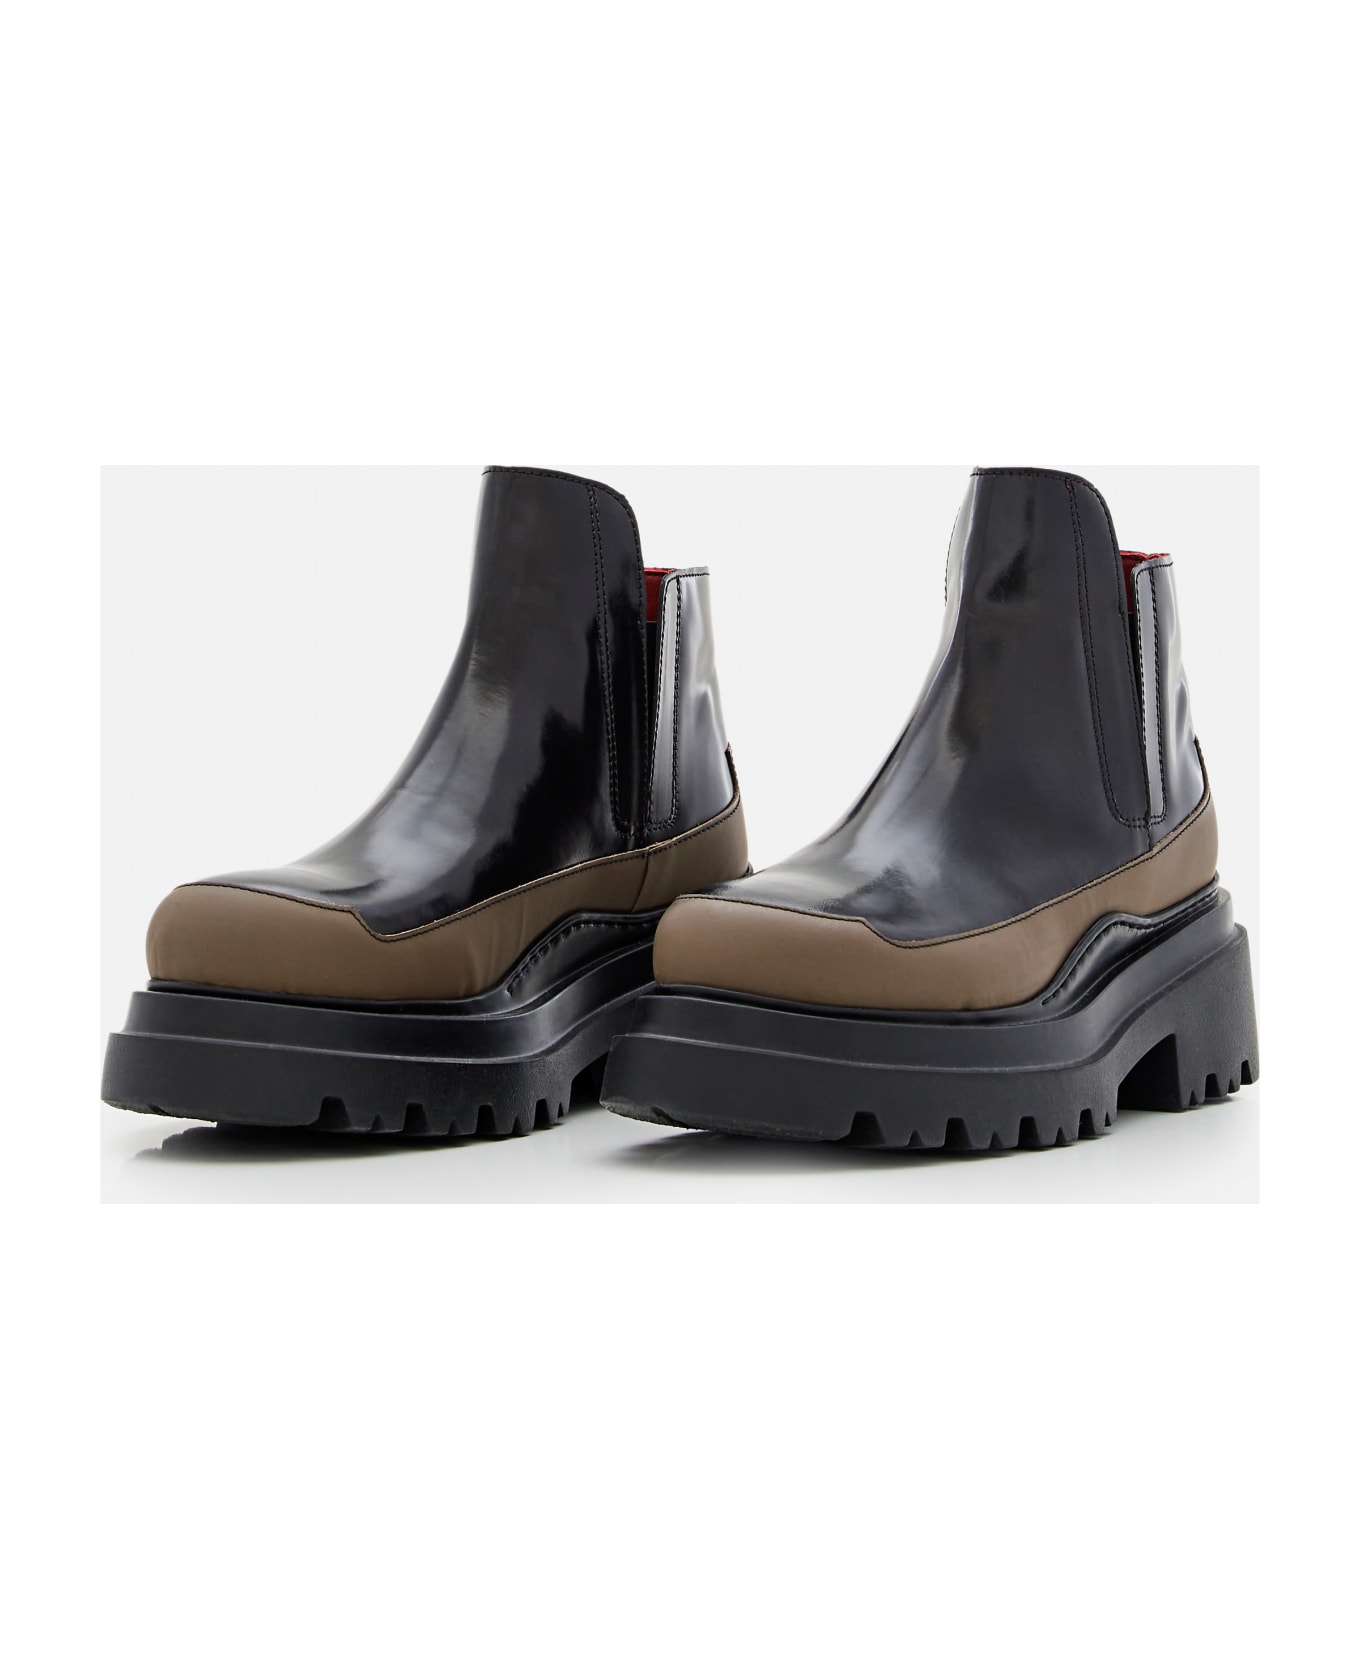 Plan C Brushed Leather Track Ankle Boots - Black